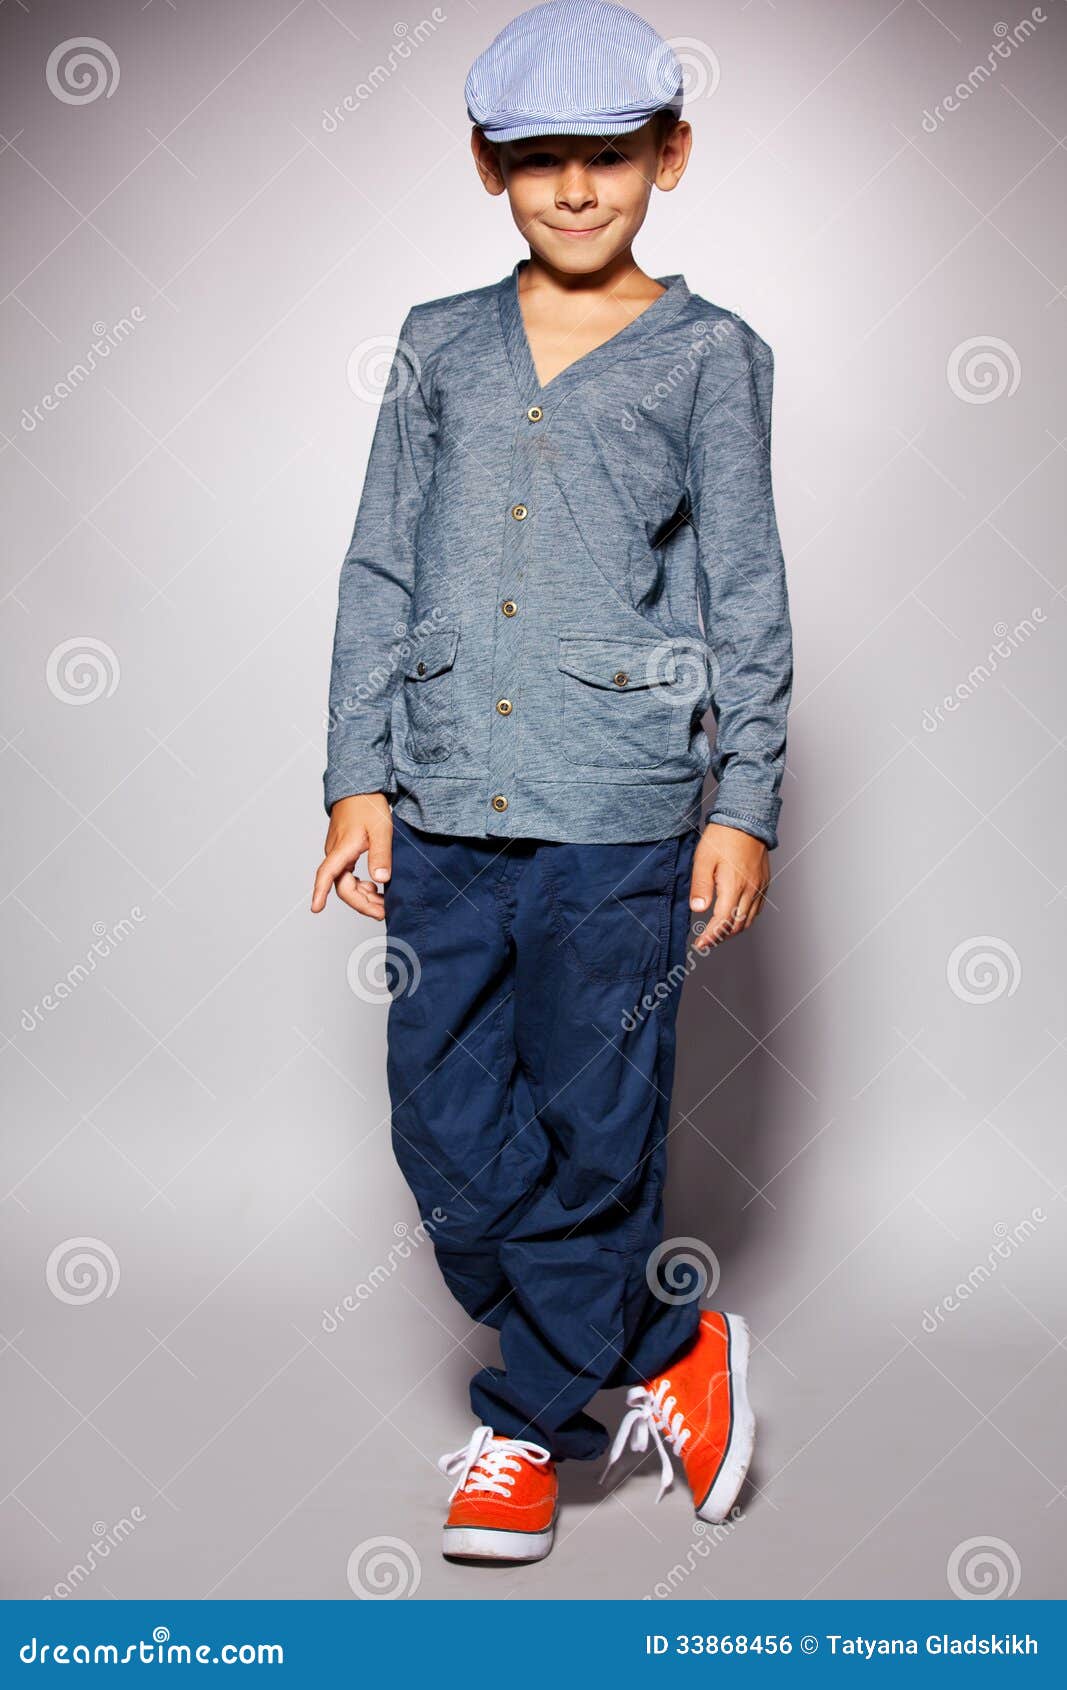 Where do you find free pictures of kid models?